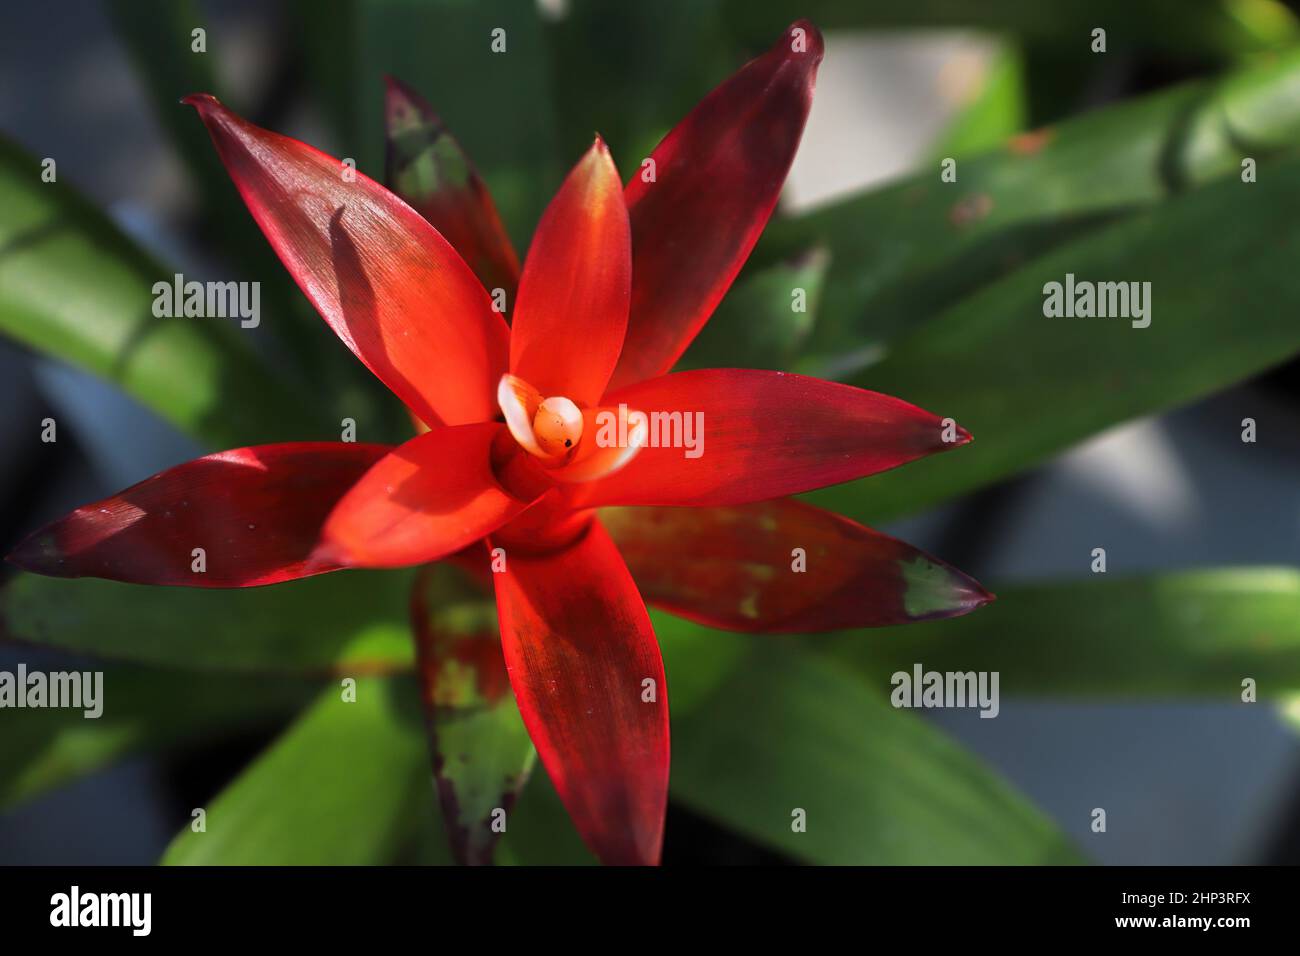 Closeup top view of red bromeliad leaf stalks. Stock Photo